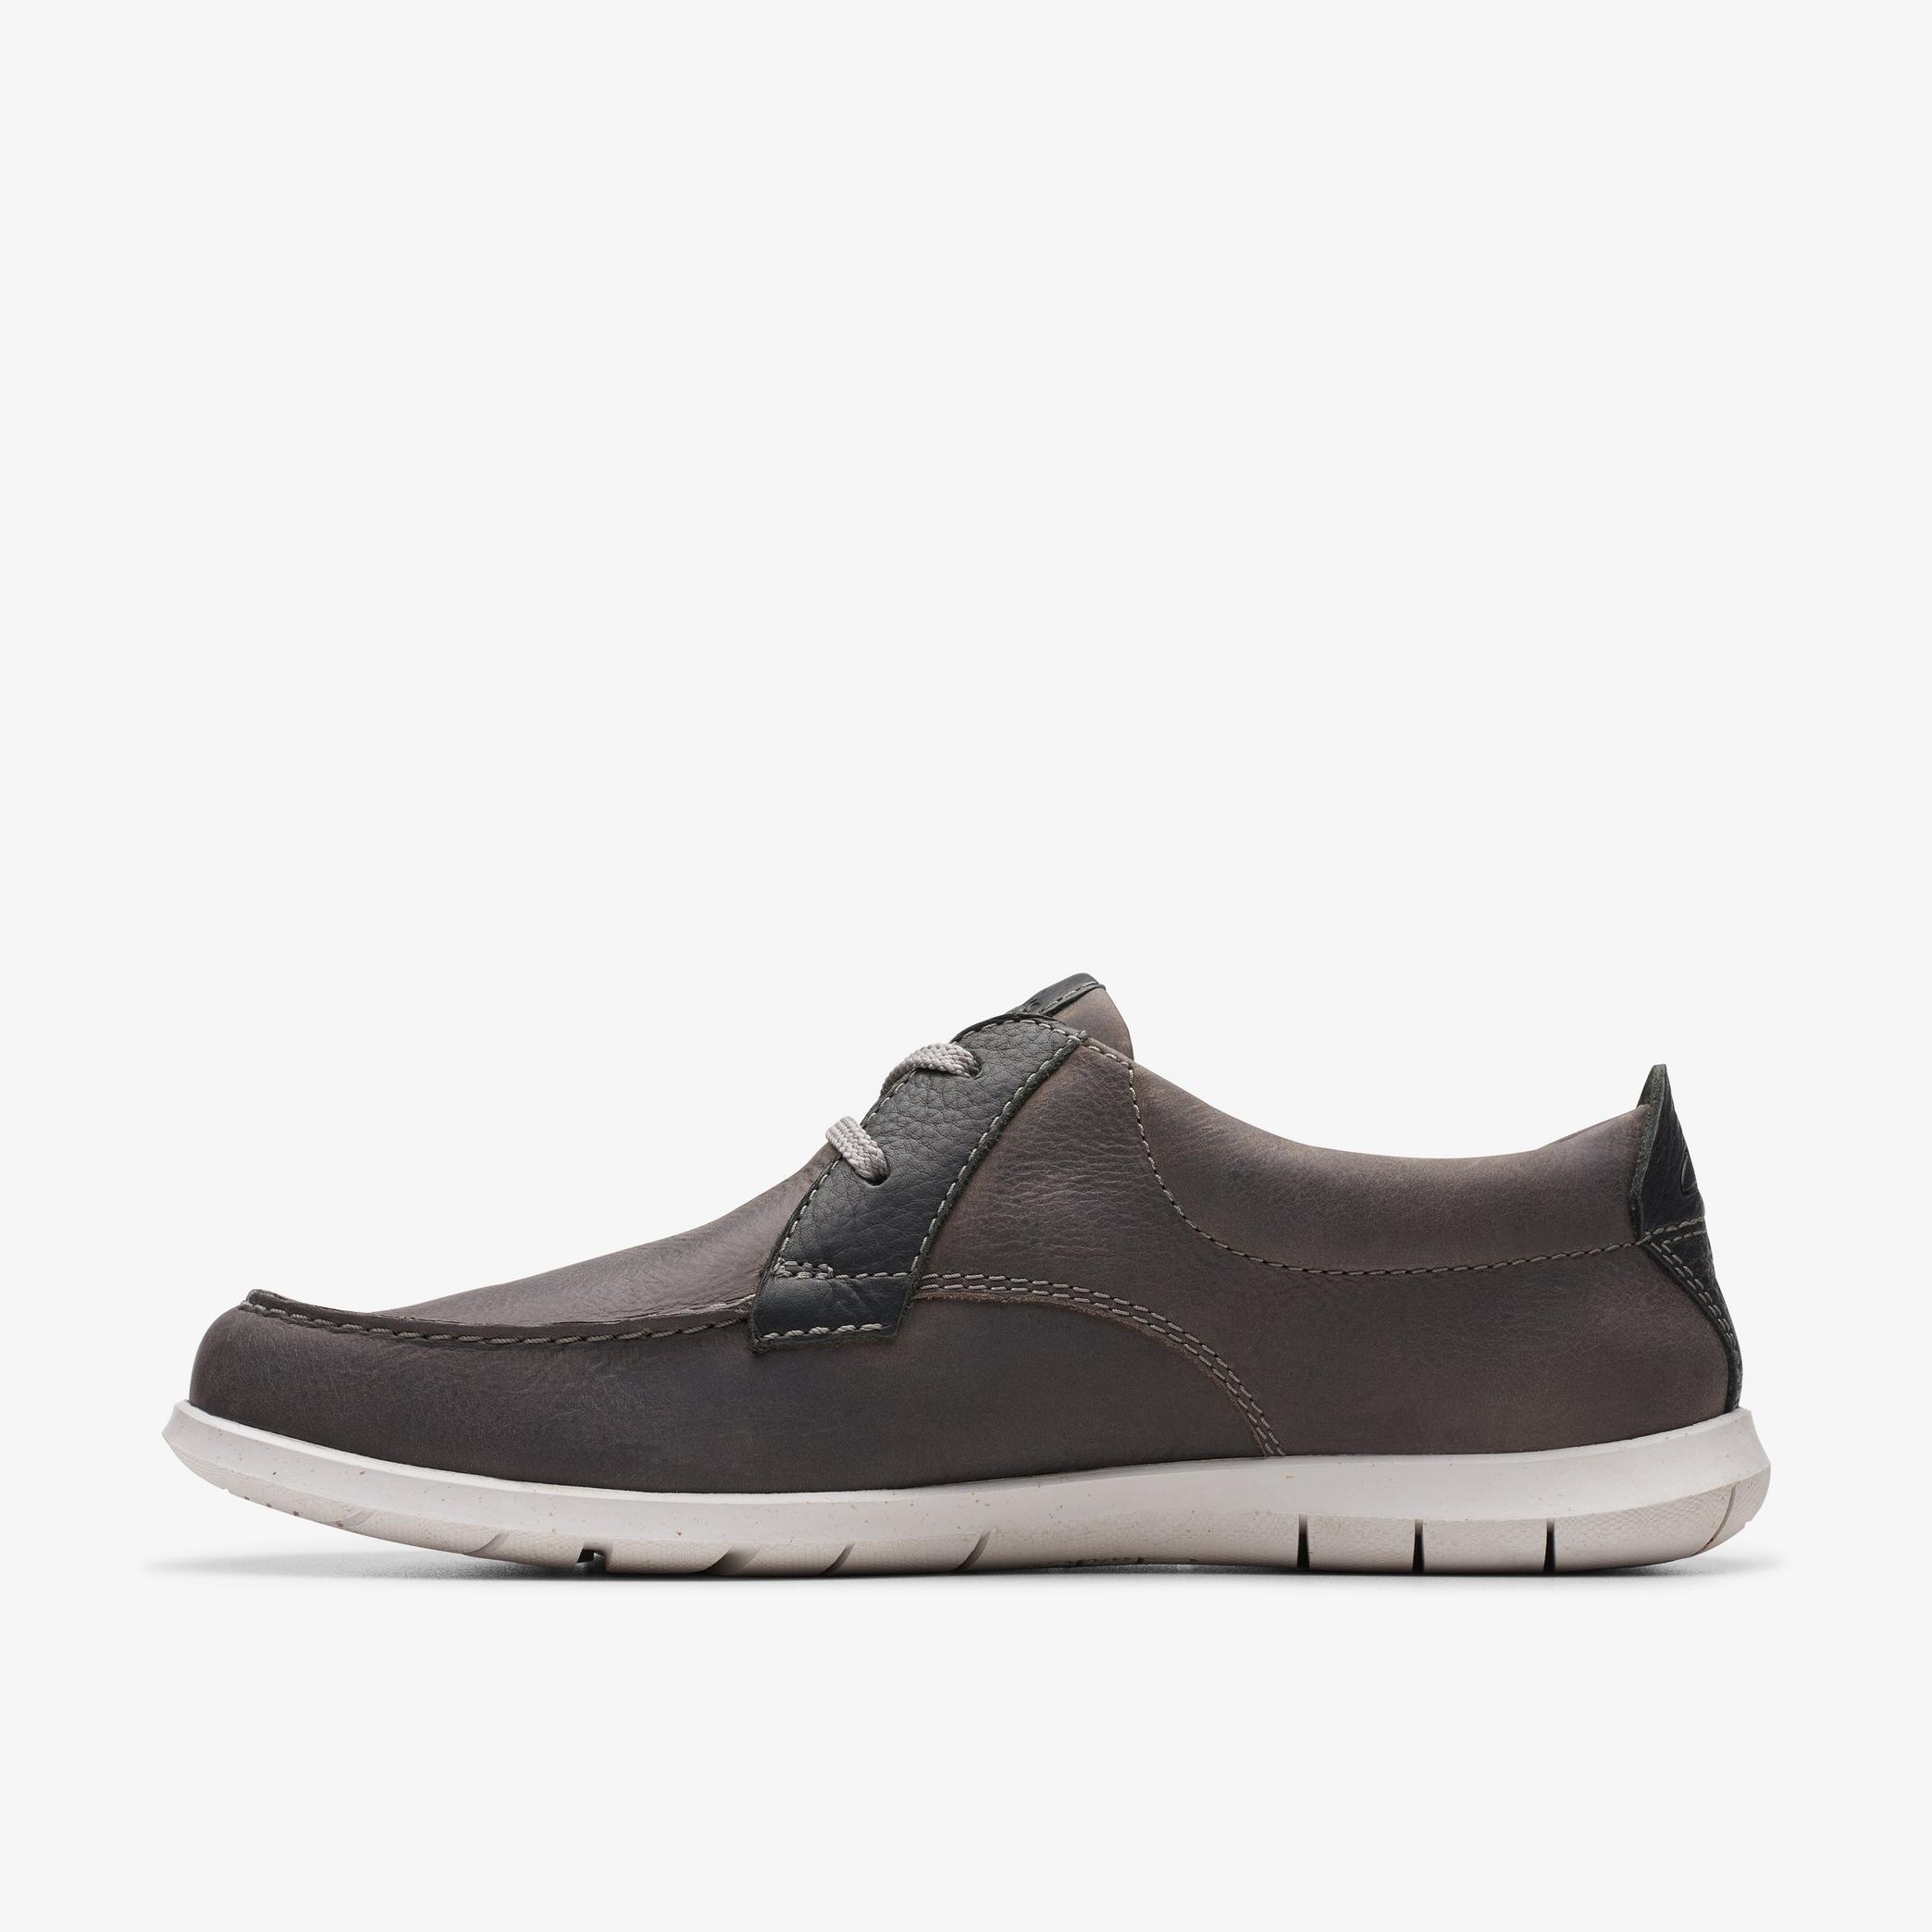 MENS Flexway Lace Light Grey Leather Boat Shoes | Clarks US